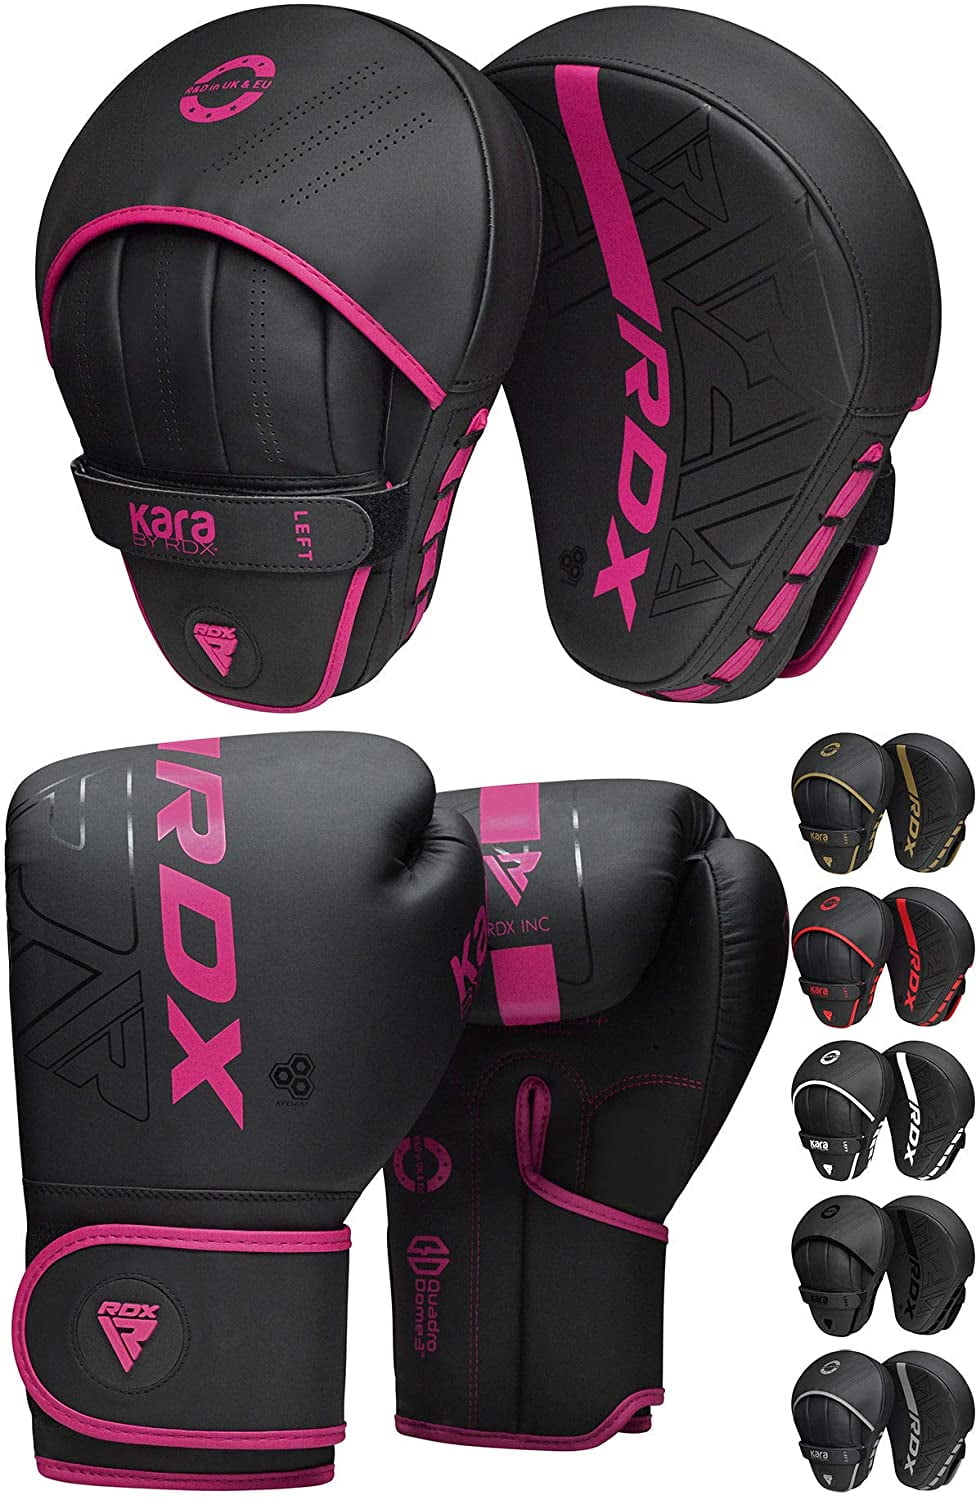 Lovely Kids Focus Pads Hook and Jab,MMA Boxing Kick Muay Thai Mitts Gloves Set 